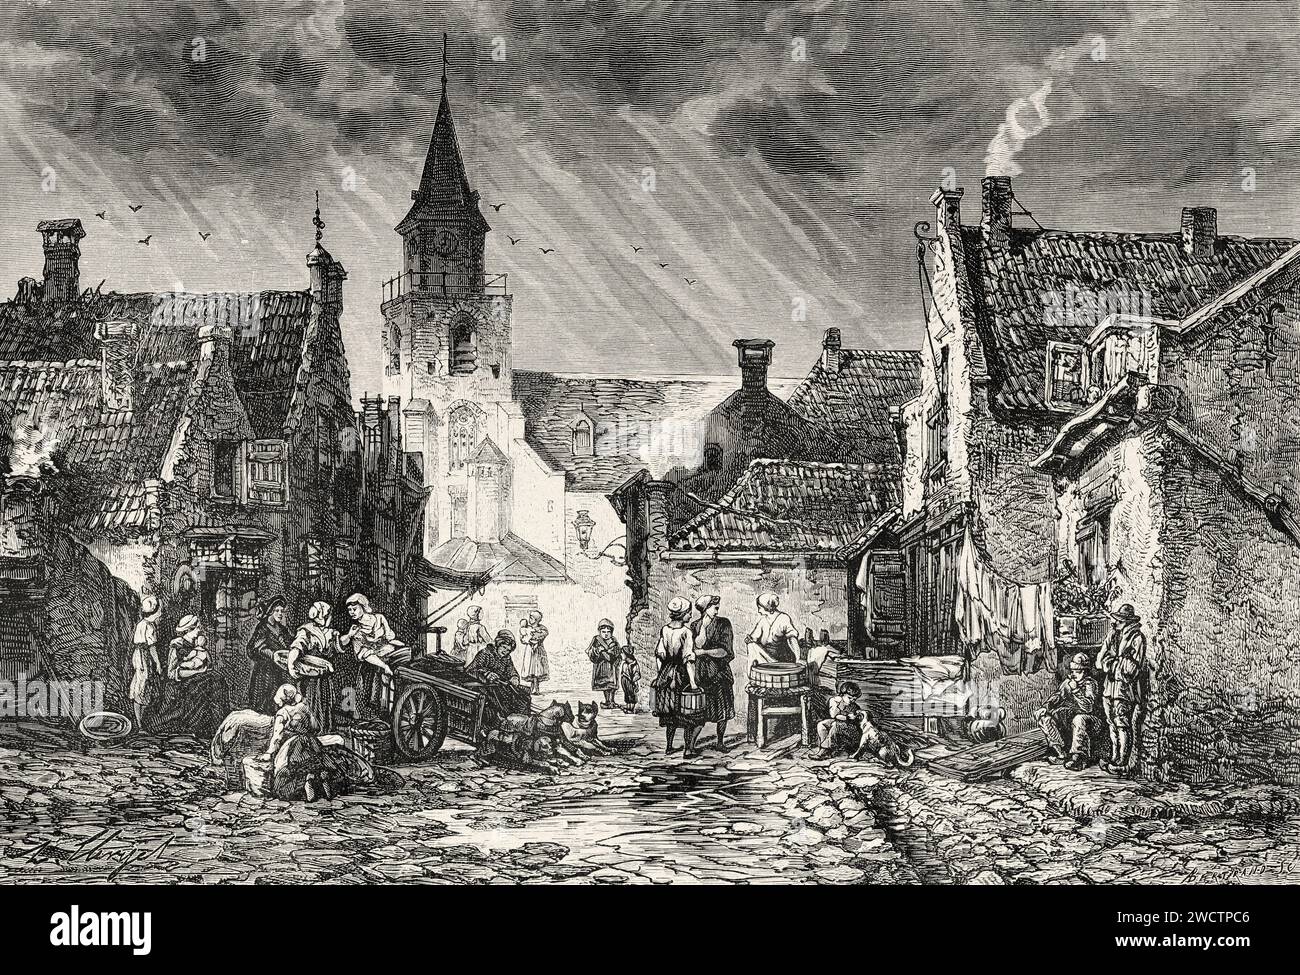 A street in the old town of Scheveningen, Holland. Europe. Netherlands 1878 by Charles de Coster (1827 - 1879) Old 19th century engraving from Le Tour du Monde 1880 Stock Photo